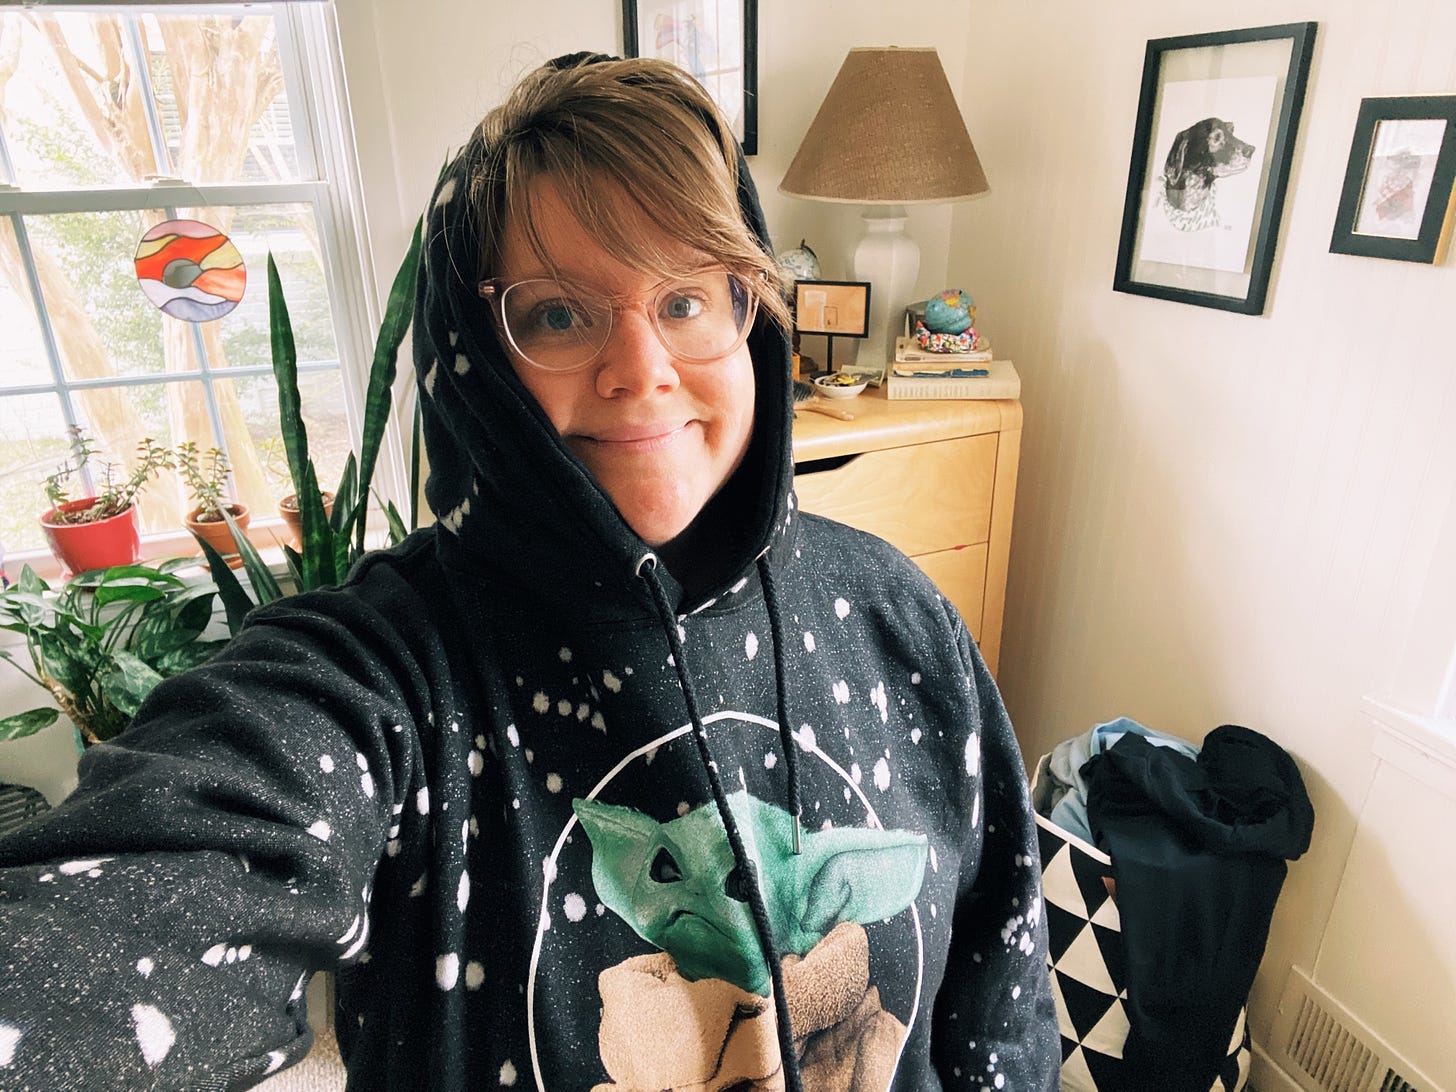 A selfie of a person with dishevled blonde hair wearing a hooded sweatshirt. The sweatshirt has an image of Baby Yoda on it.